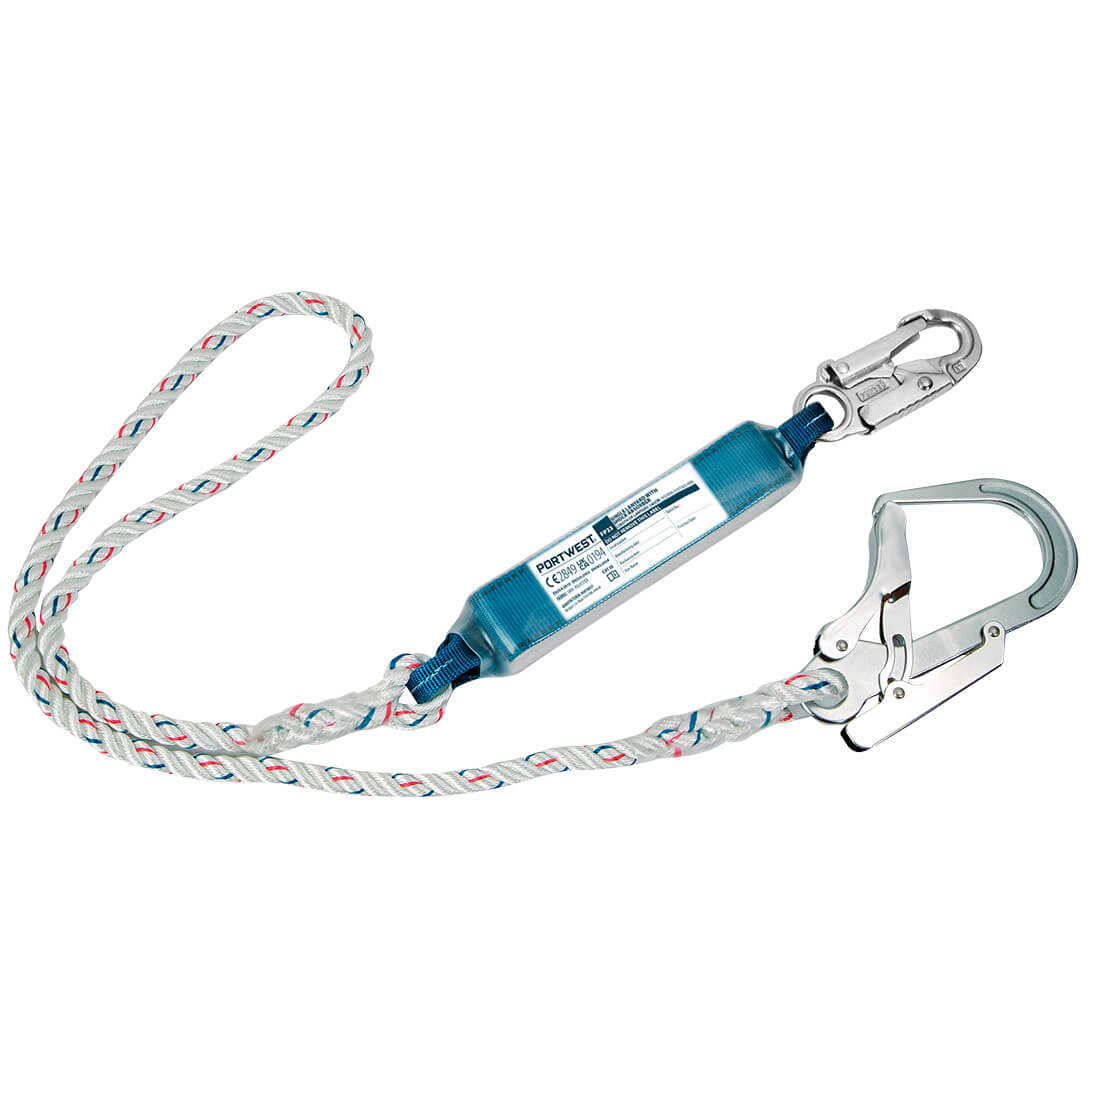 Single 1.8m Lanyard With Shock Absorber  (FP23)